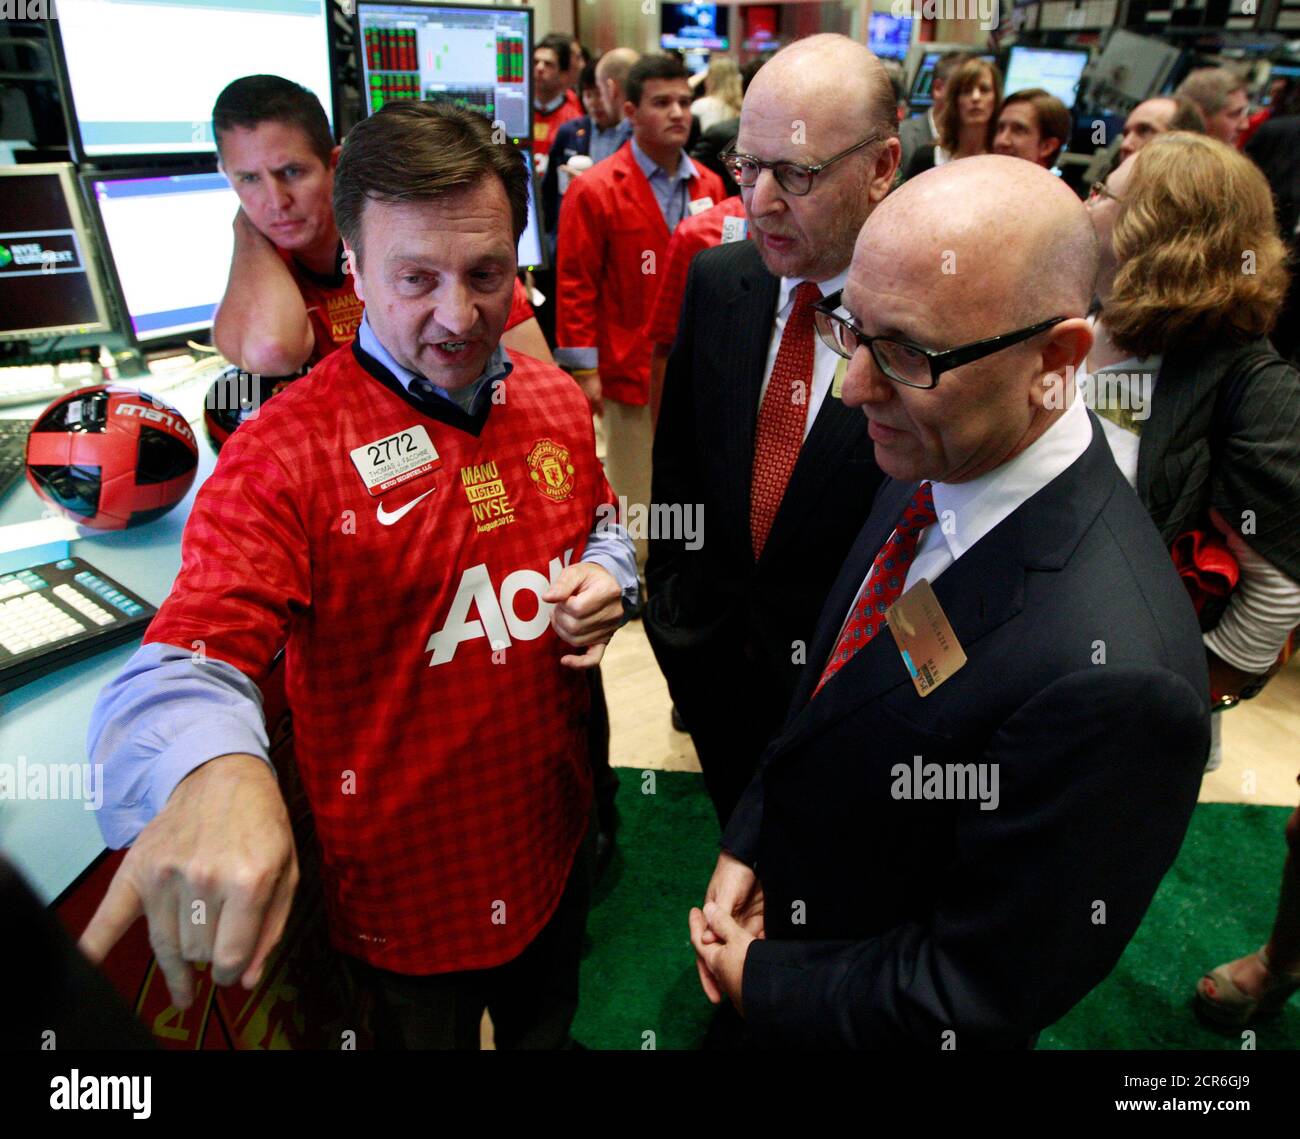 Floor official Thomas Facchine (L) of Getco Securities talks with Manchester United owners Avram (C) and Joel Glazer (R) following the start of trading of Manchester United Ltd following its initial public offering on the floor of the New York Stock Exchange, August 10, 2012. Shares in Manchester United priced below expectations and were essentially flat in early trading on Friday, a disappointing stock market debut for the world's most famous soccer club and most valuable sporting team. REUTERS/Brendan McDermid (UNITED STATES - Tags: BUSINESS SPORT SOCCER) Stock Photo